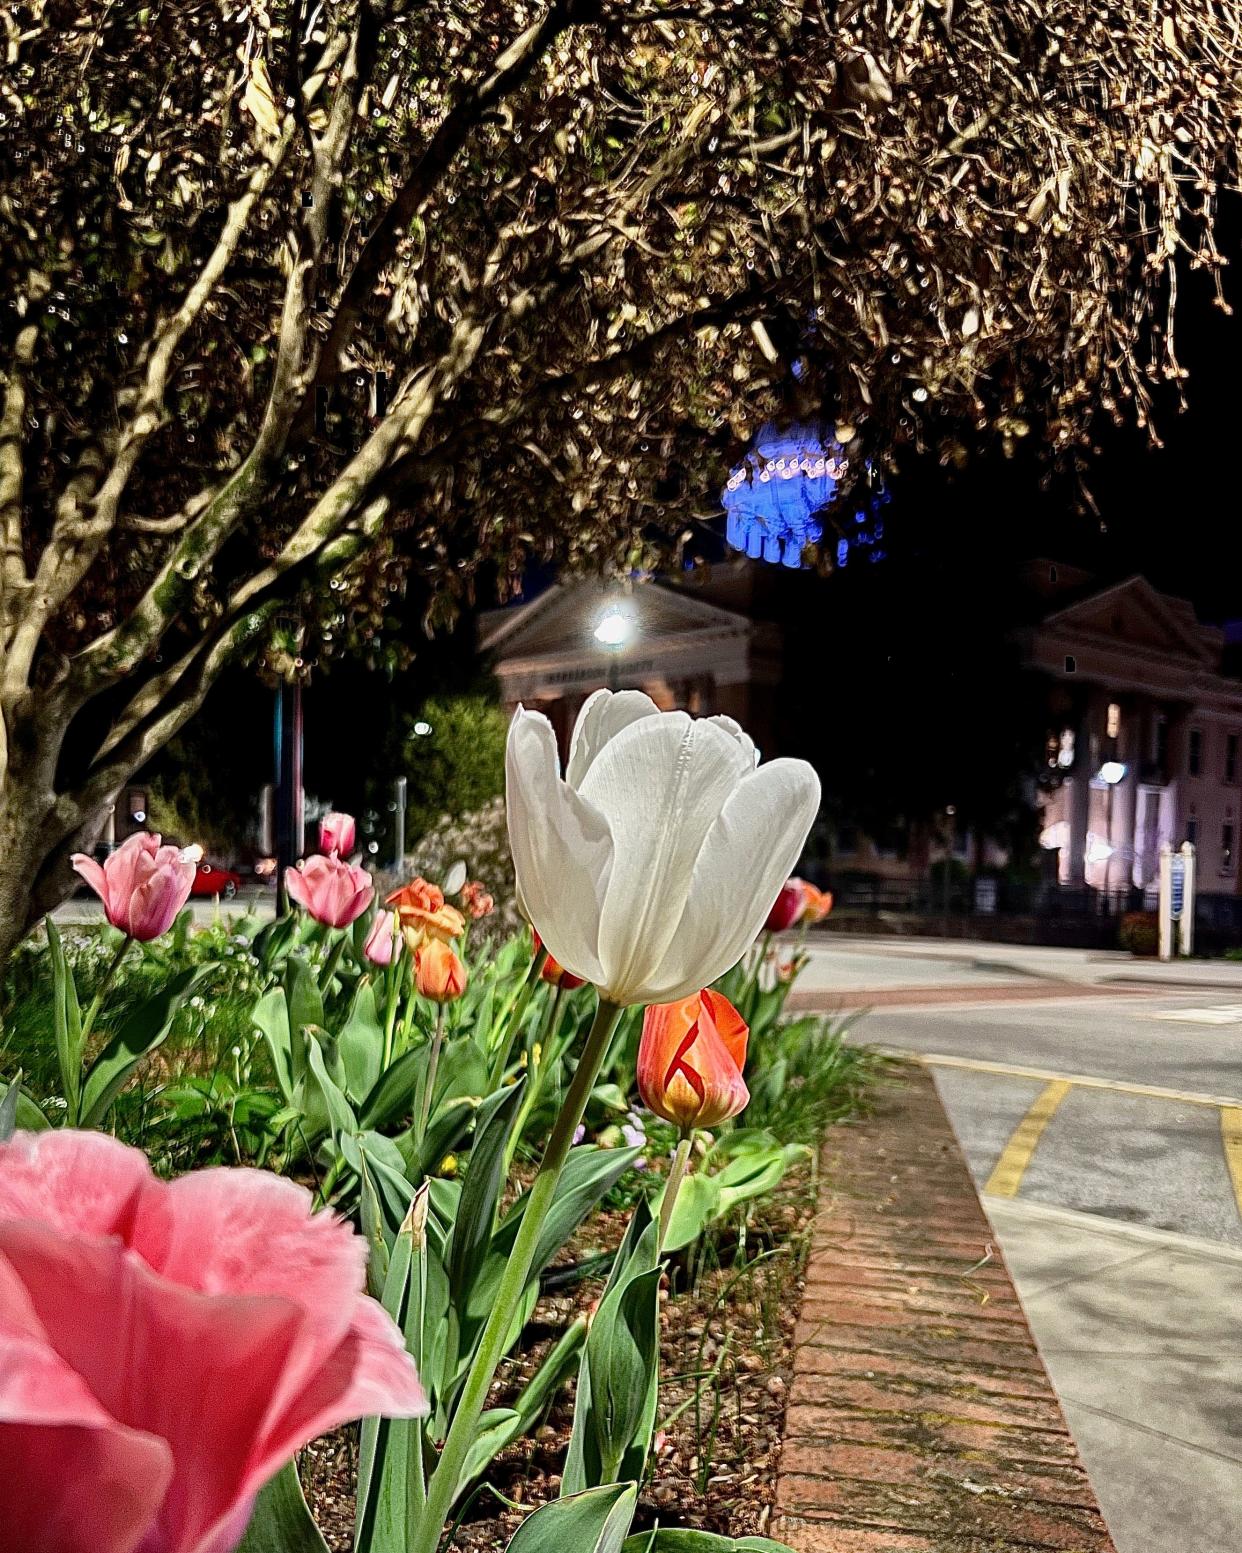 Deb Anderson of Laurel Park's photo called "Night Bloomers" was the winner of the 2023 Tulip Extravaganza photo contest put on by Barbara Hughes of Narnia Studios.